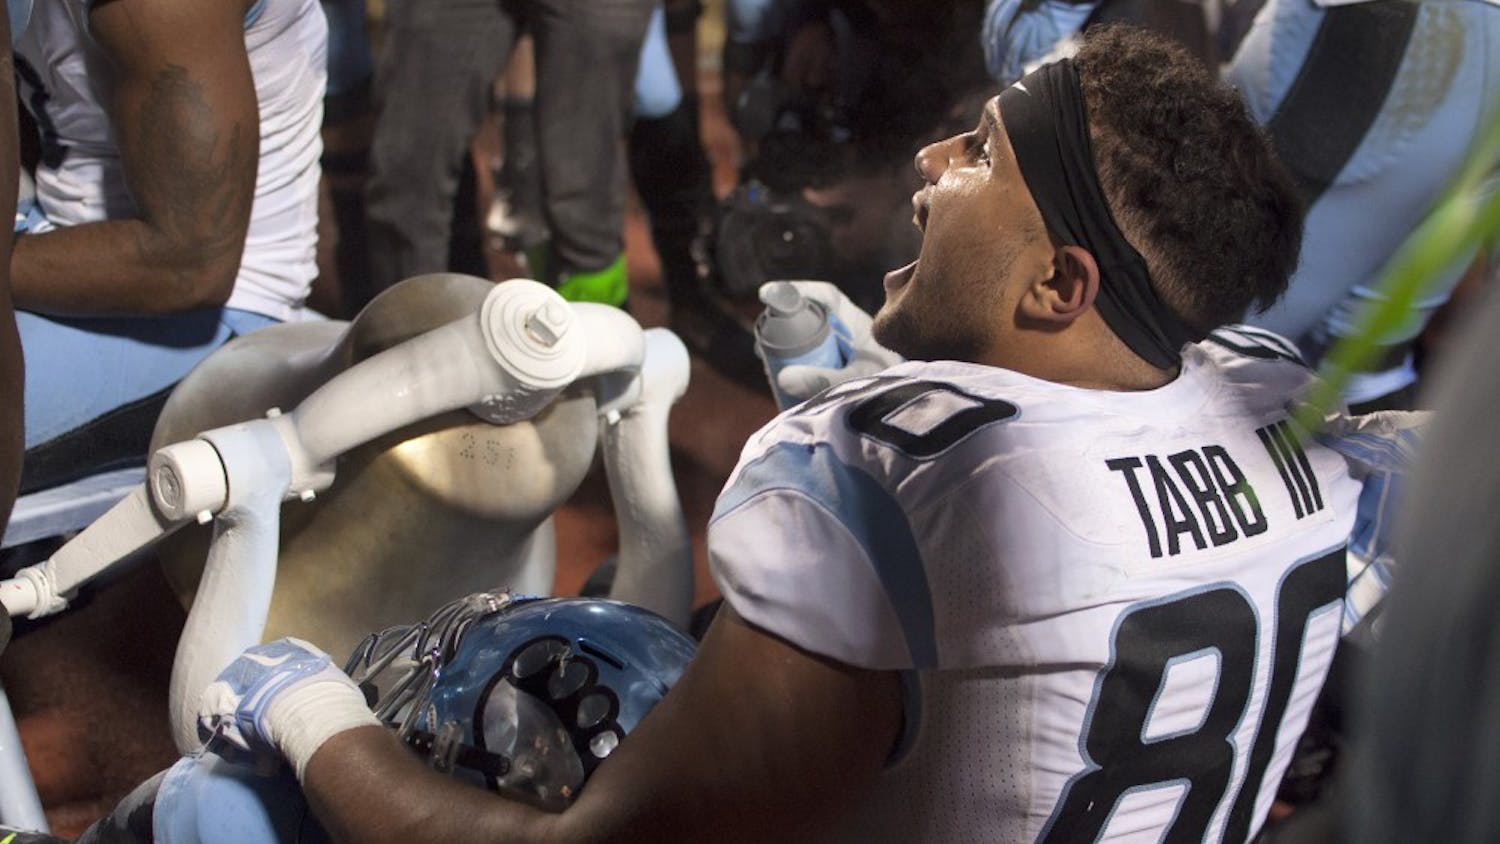 For the first time in three years, the Tar Heels defeated the Duke Blue Devils and will bring the Victory Bell back to Chapel Hill — painted a lighter shade of blue.